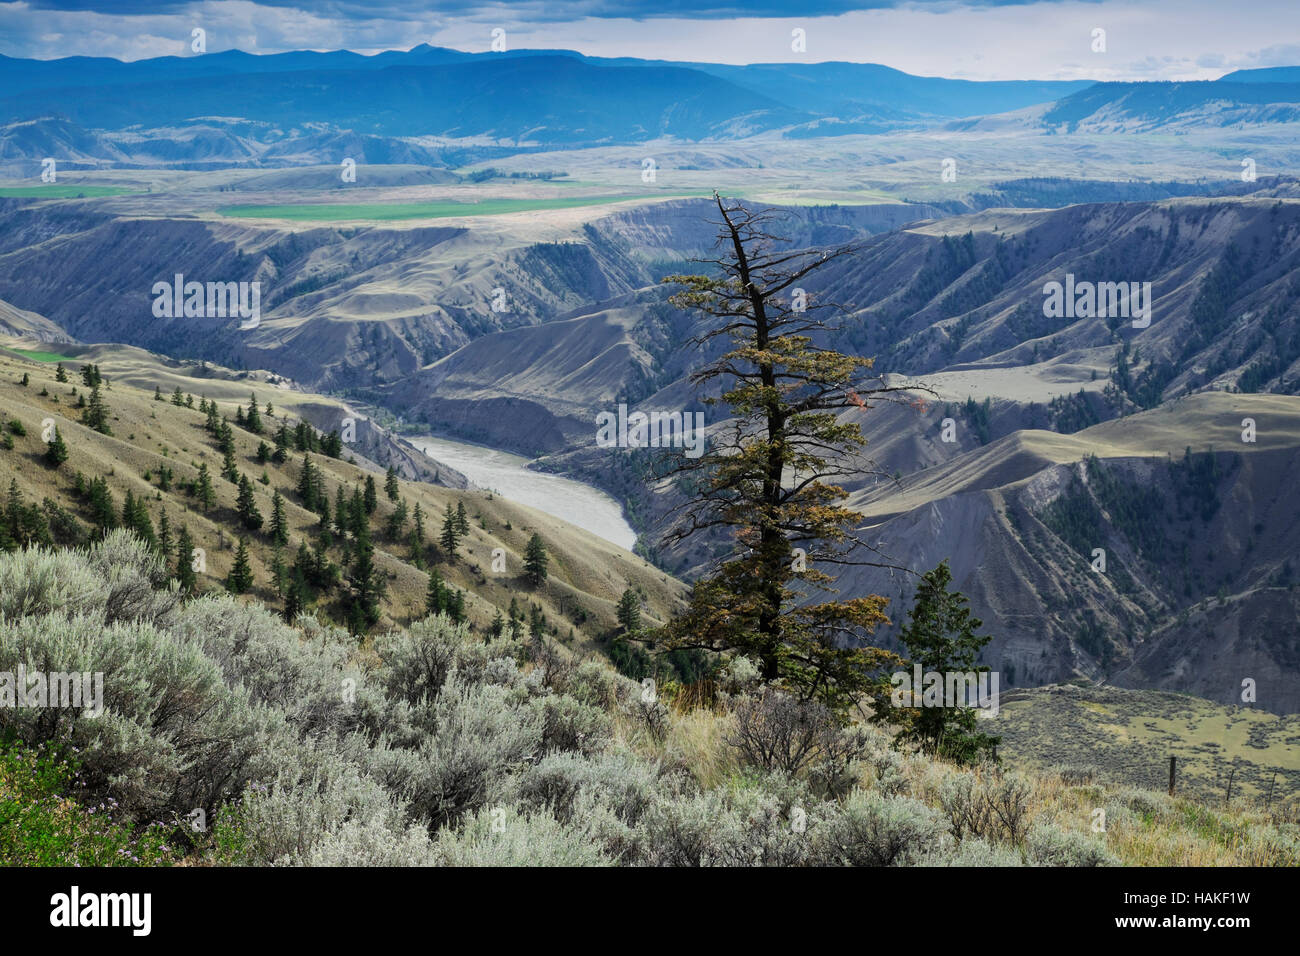 Rangeland in the Cariboo Region of British Columbia with the Fraser River and Rocky Mountains in the distance, Canada Stock Photo